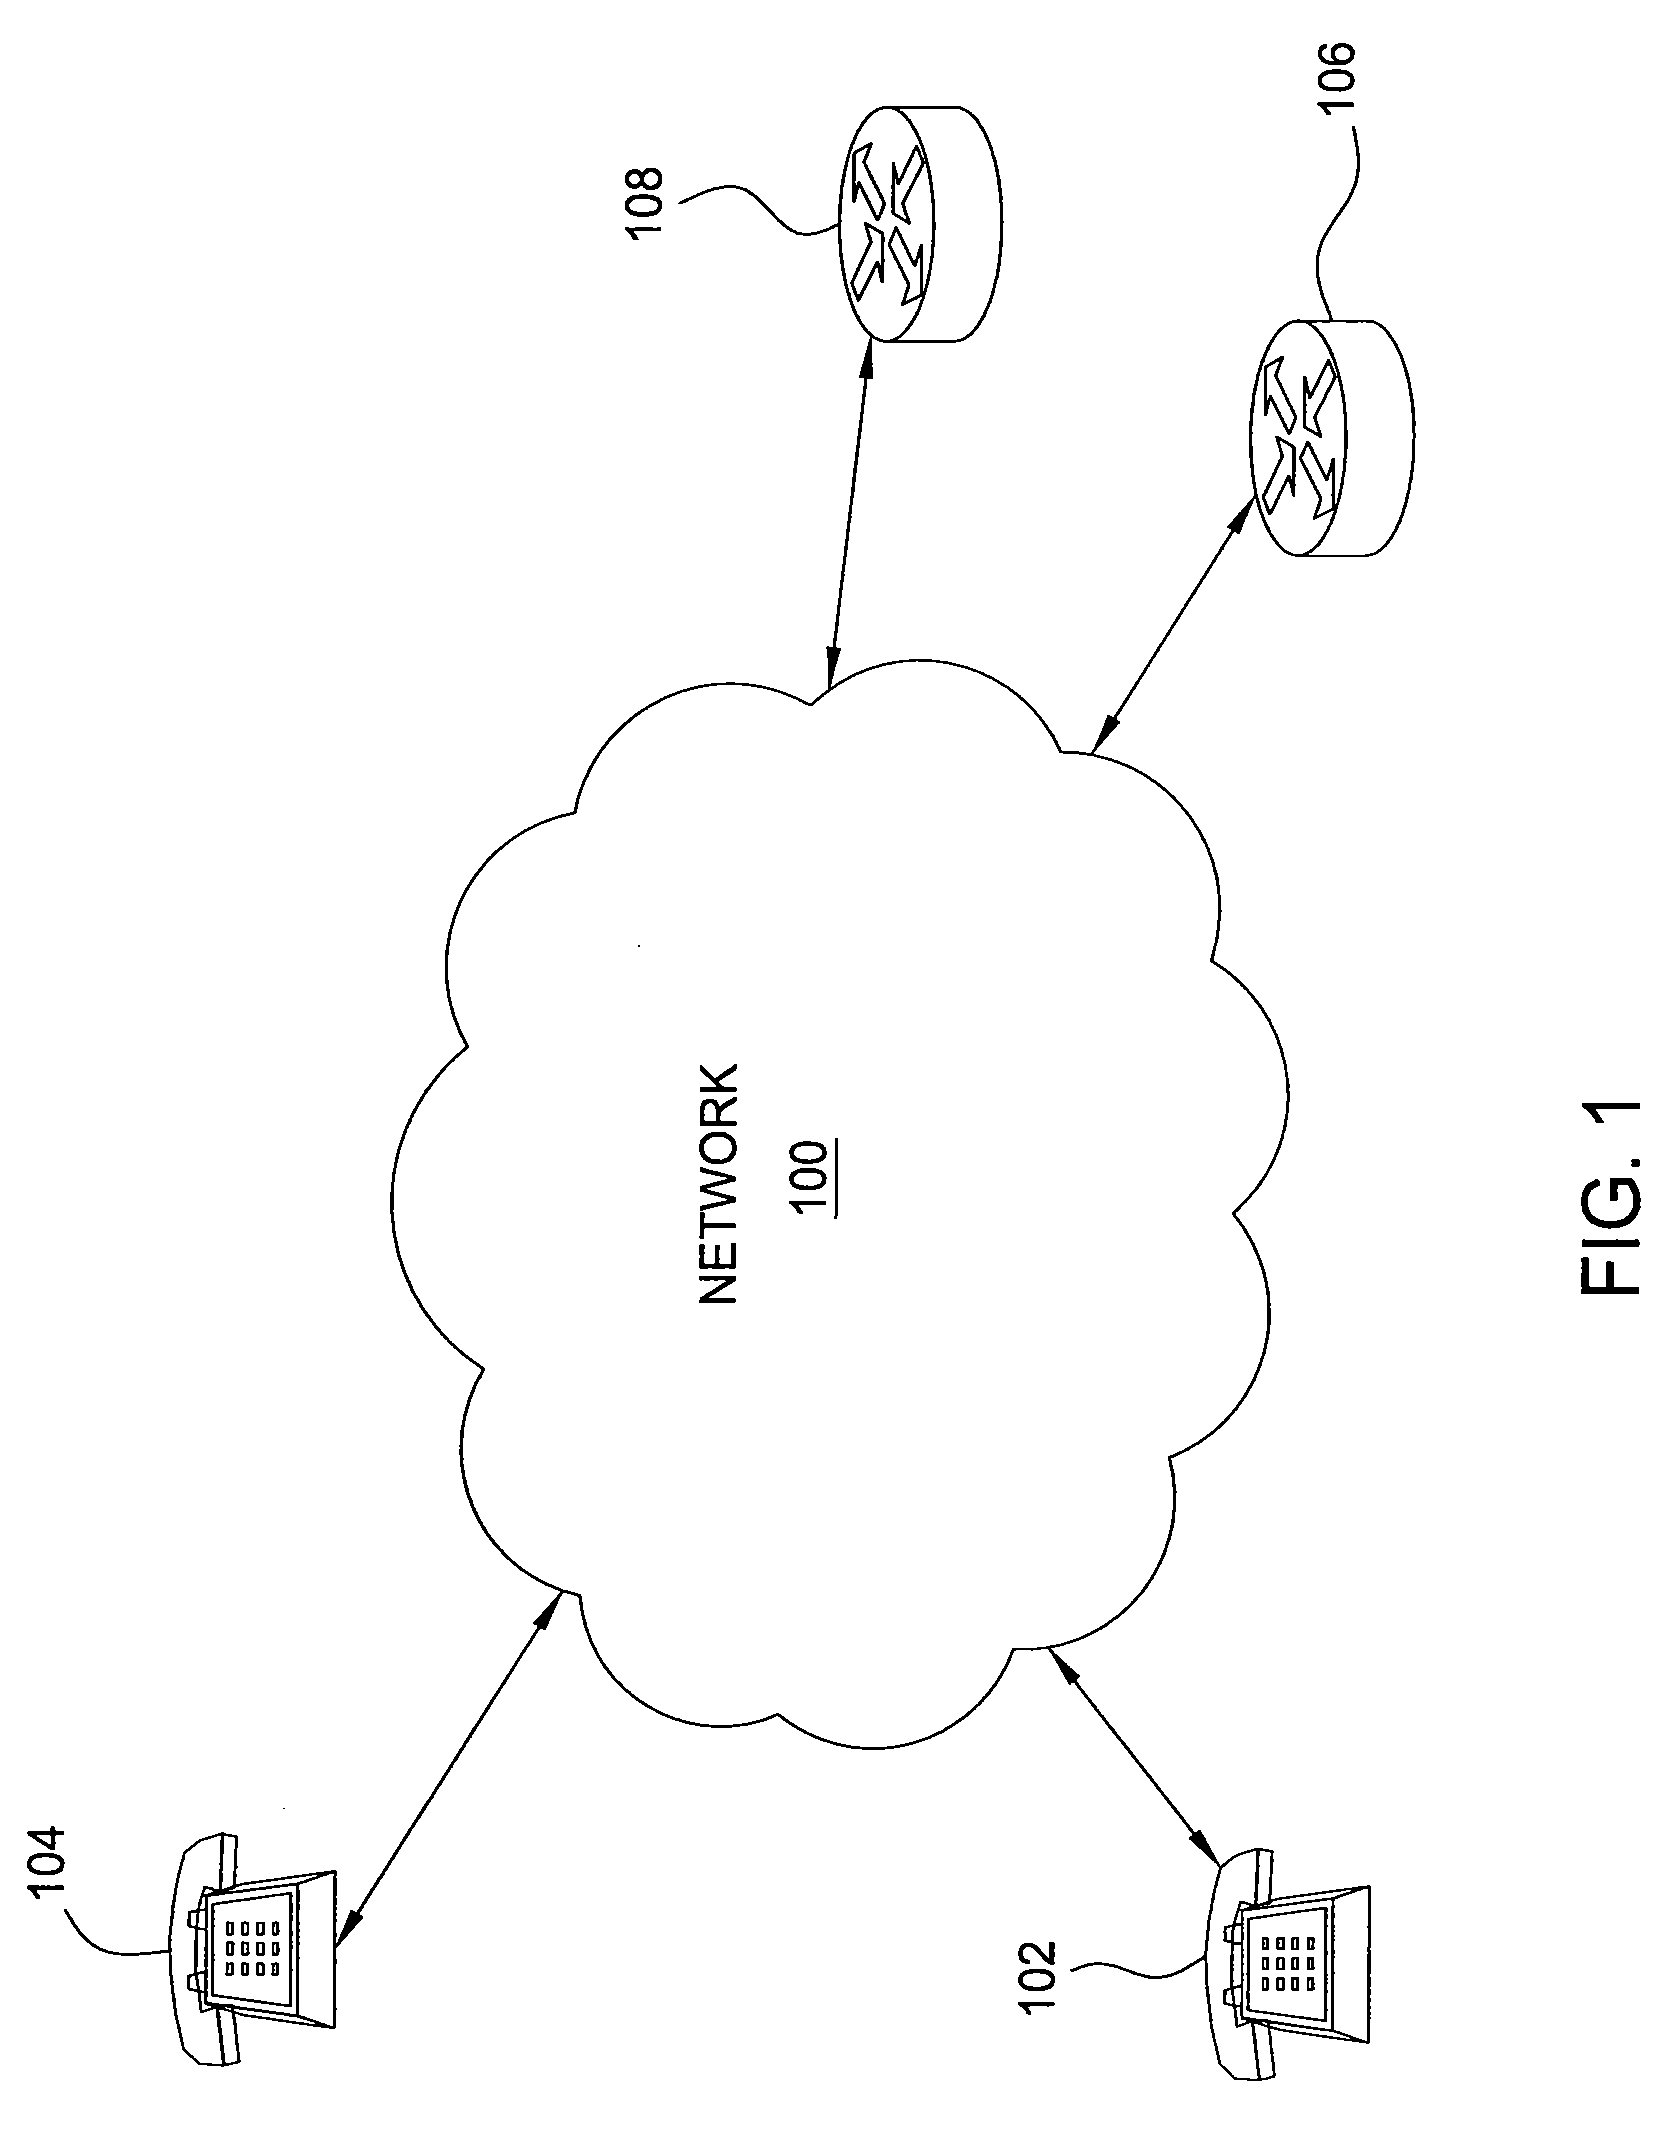 Method and apparatus for testing backup sites in a voice over internet protocol network